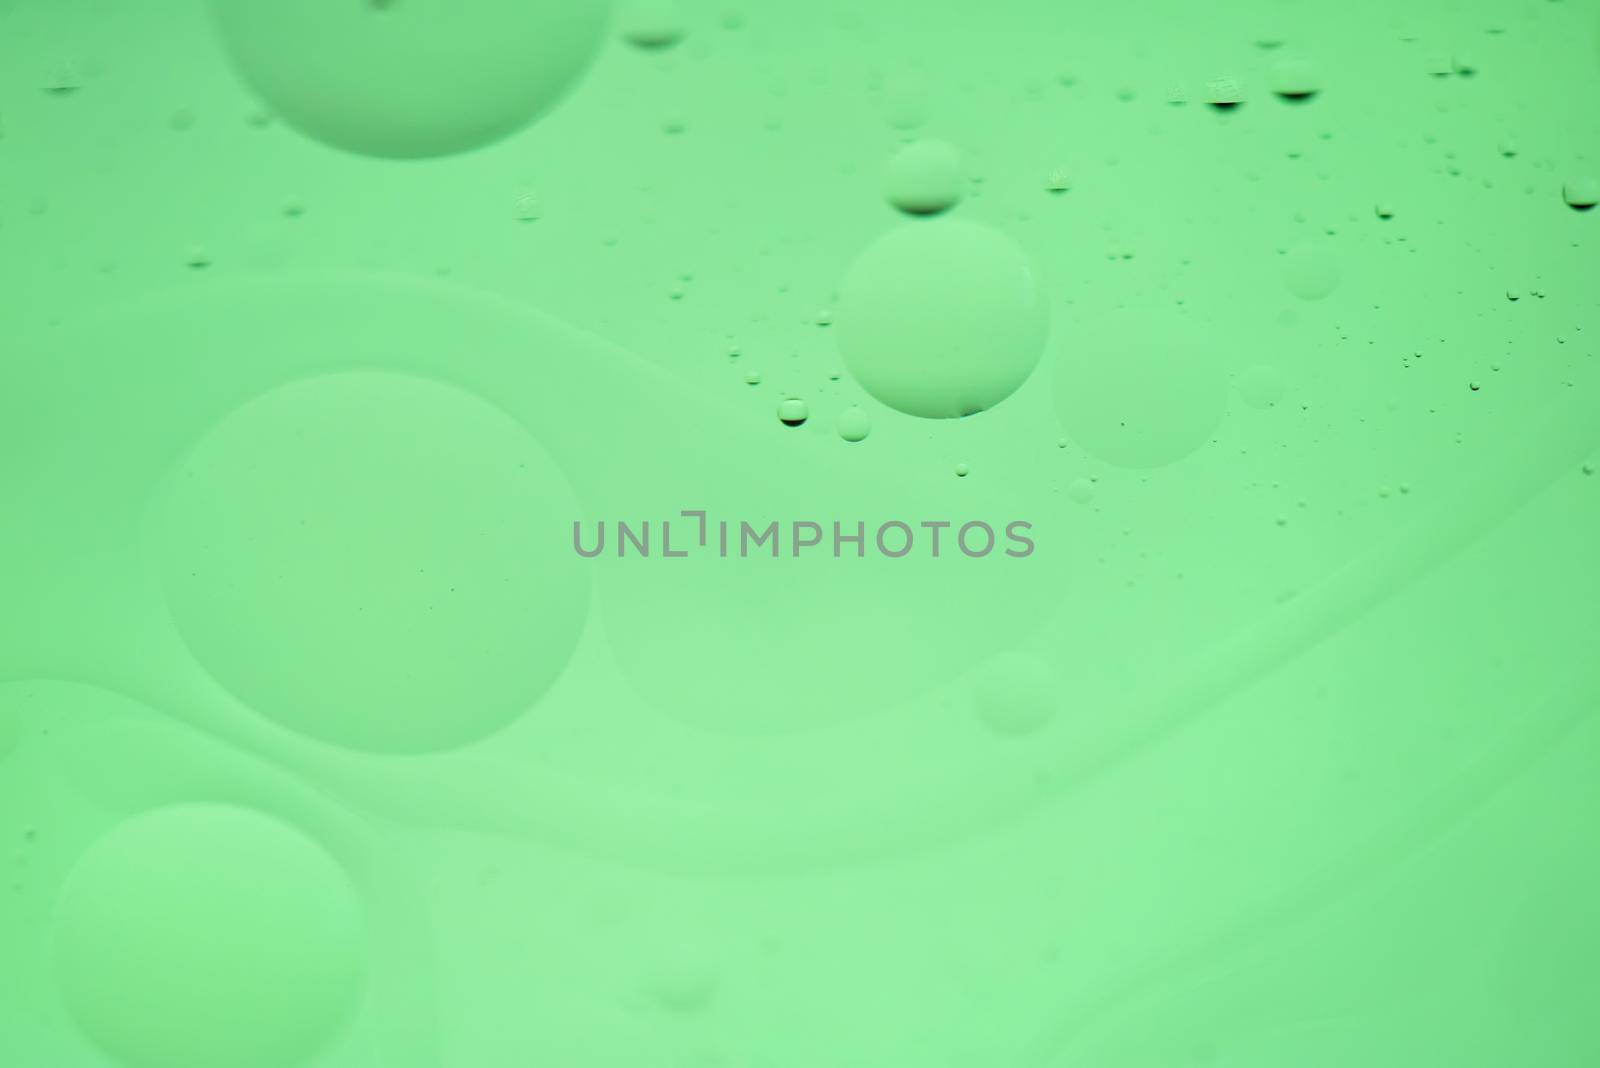 Oil drops in water. Defocused abstract psychedelic pattern image green mint colored. DOF.